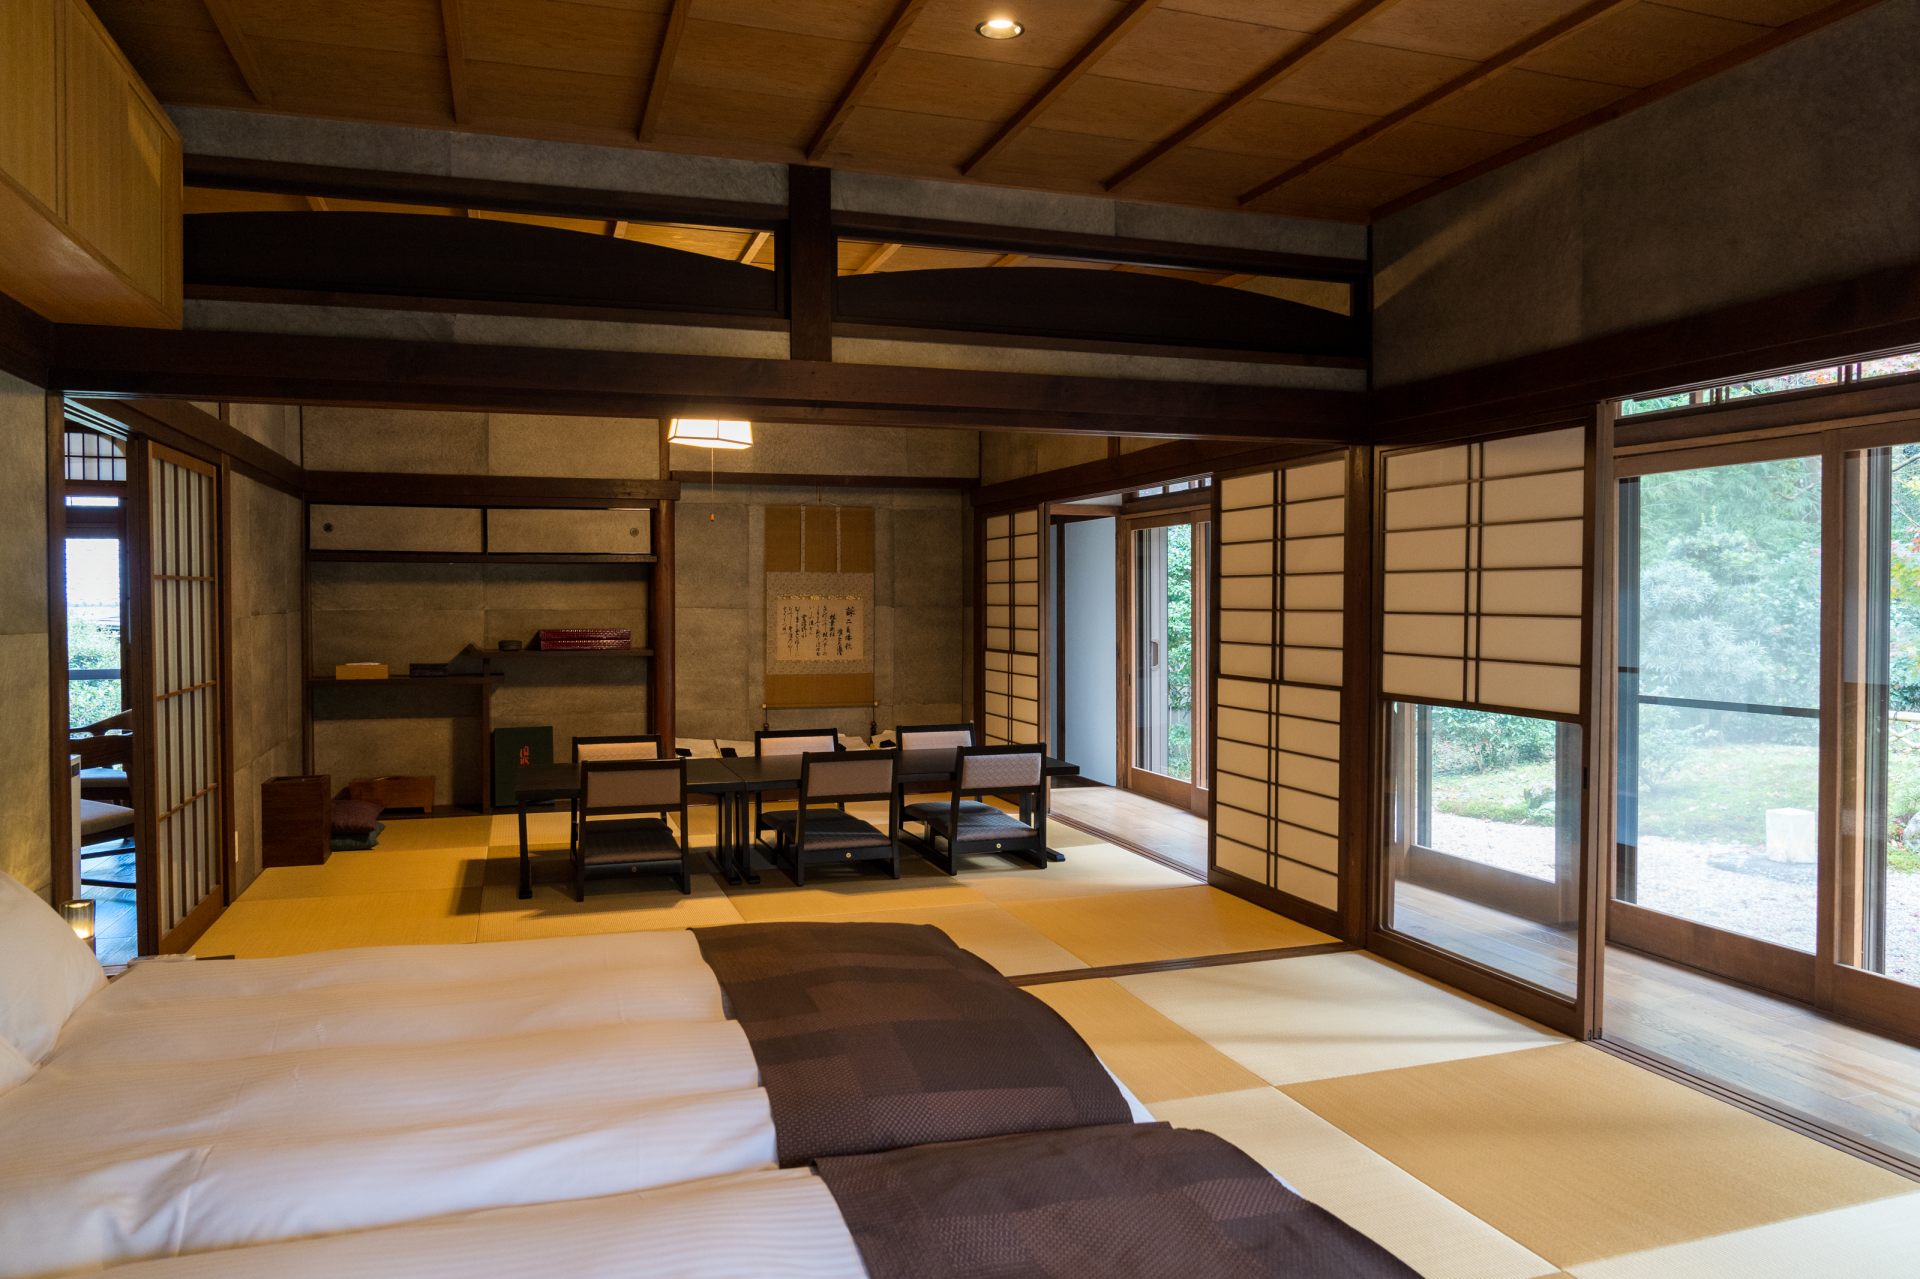 Embrace the refined traditional Japanese atmosphere overlooking the peaceful garden.